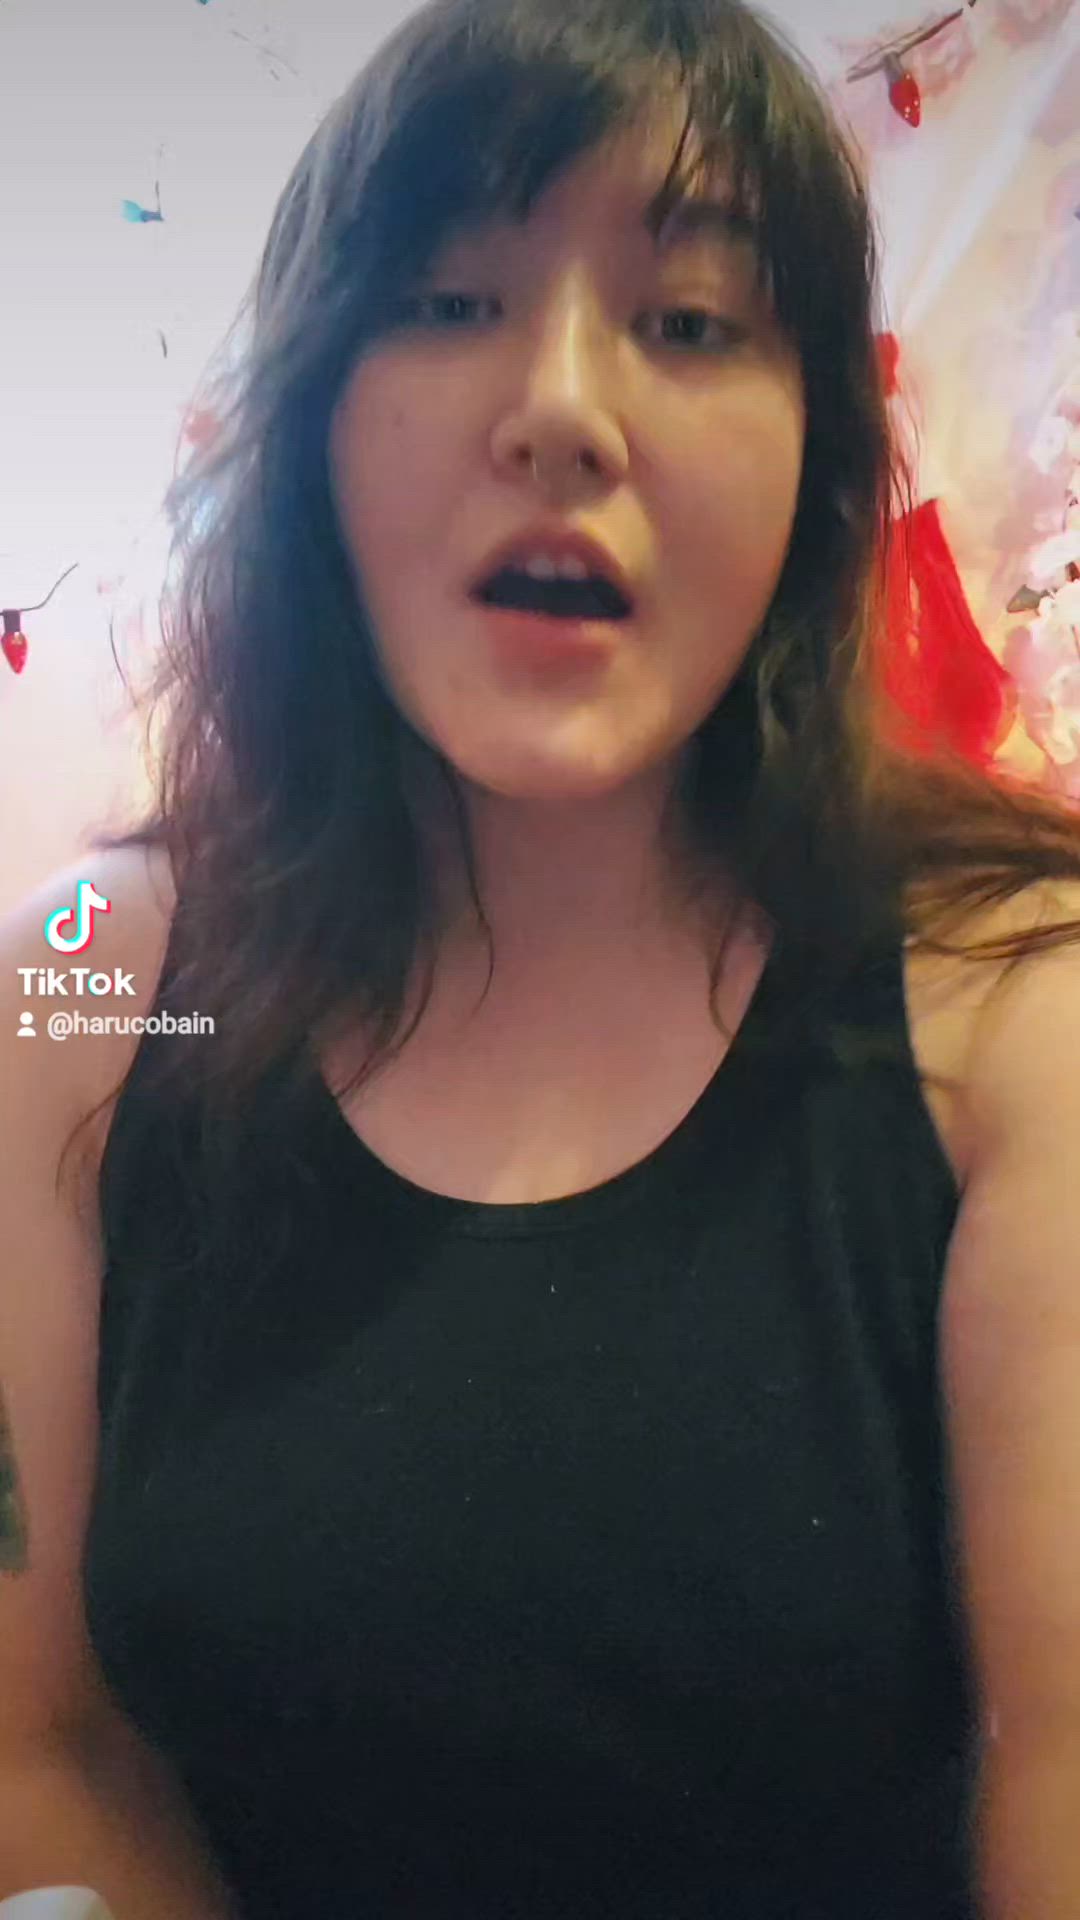 Big Tits porn video with onlyfans model 𝔥𝔞𝔯𝔲 𝔠𝔬𝔟𝔞𝔦𝔫 <strong>@harucobain</strong>